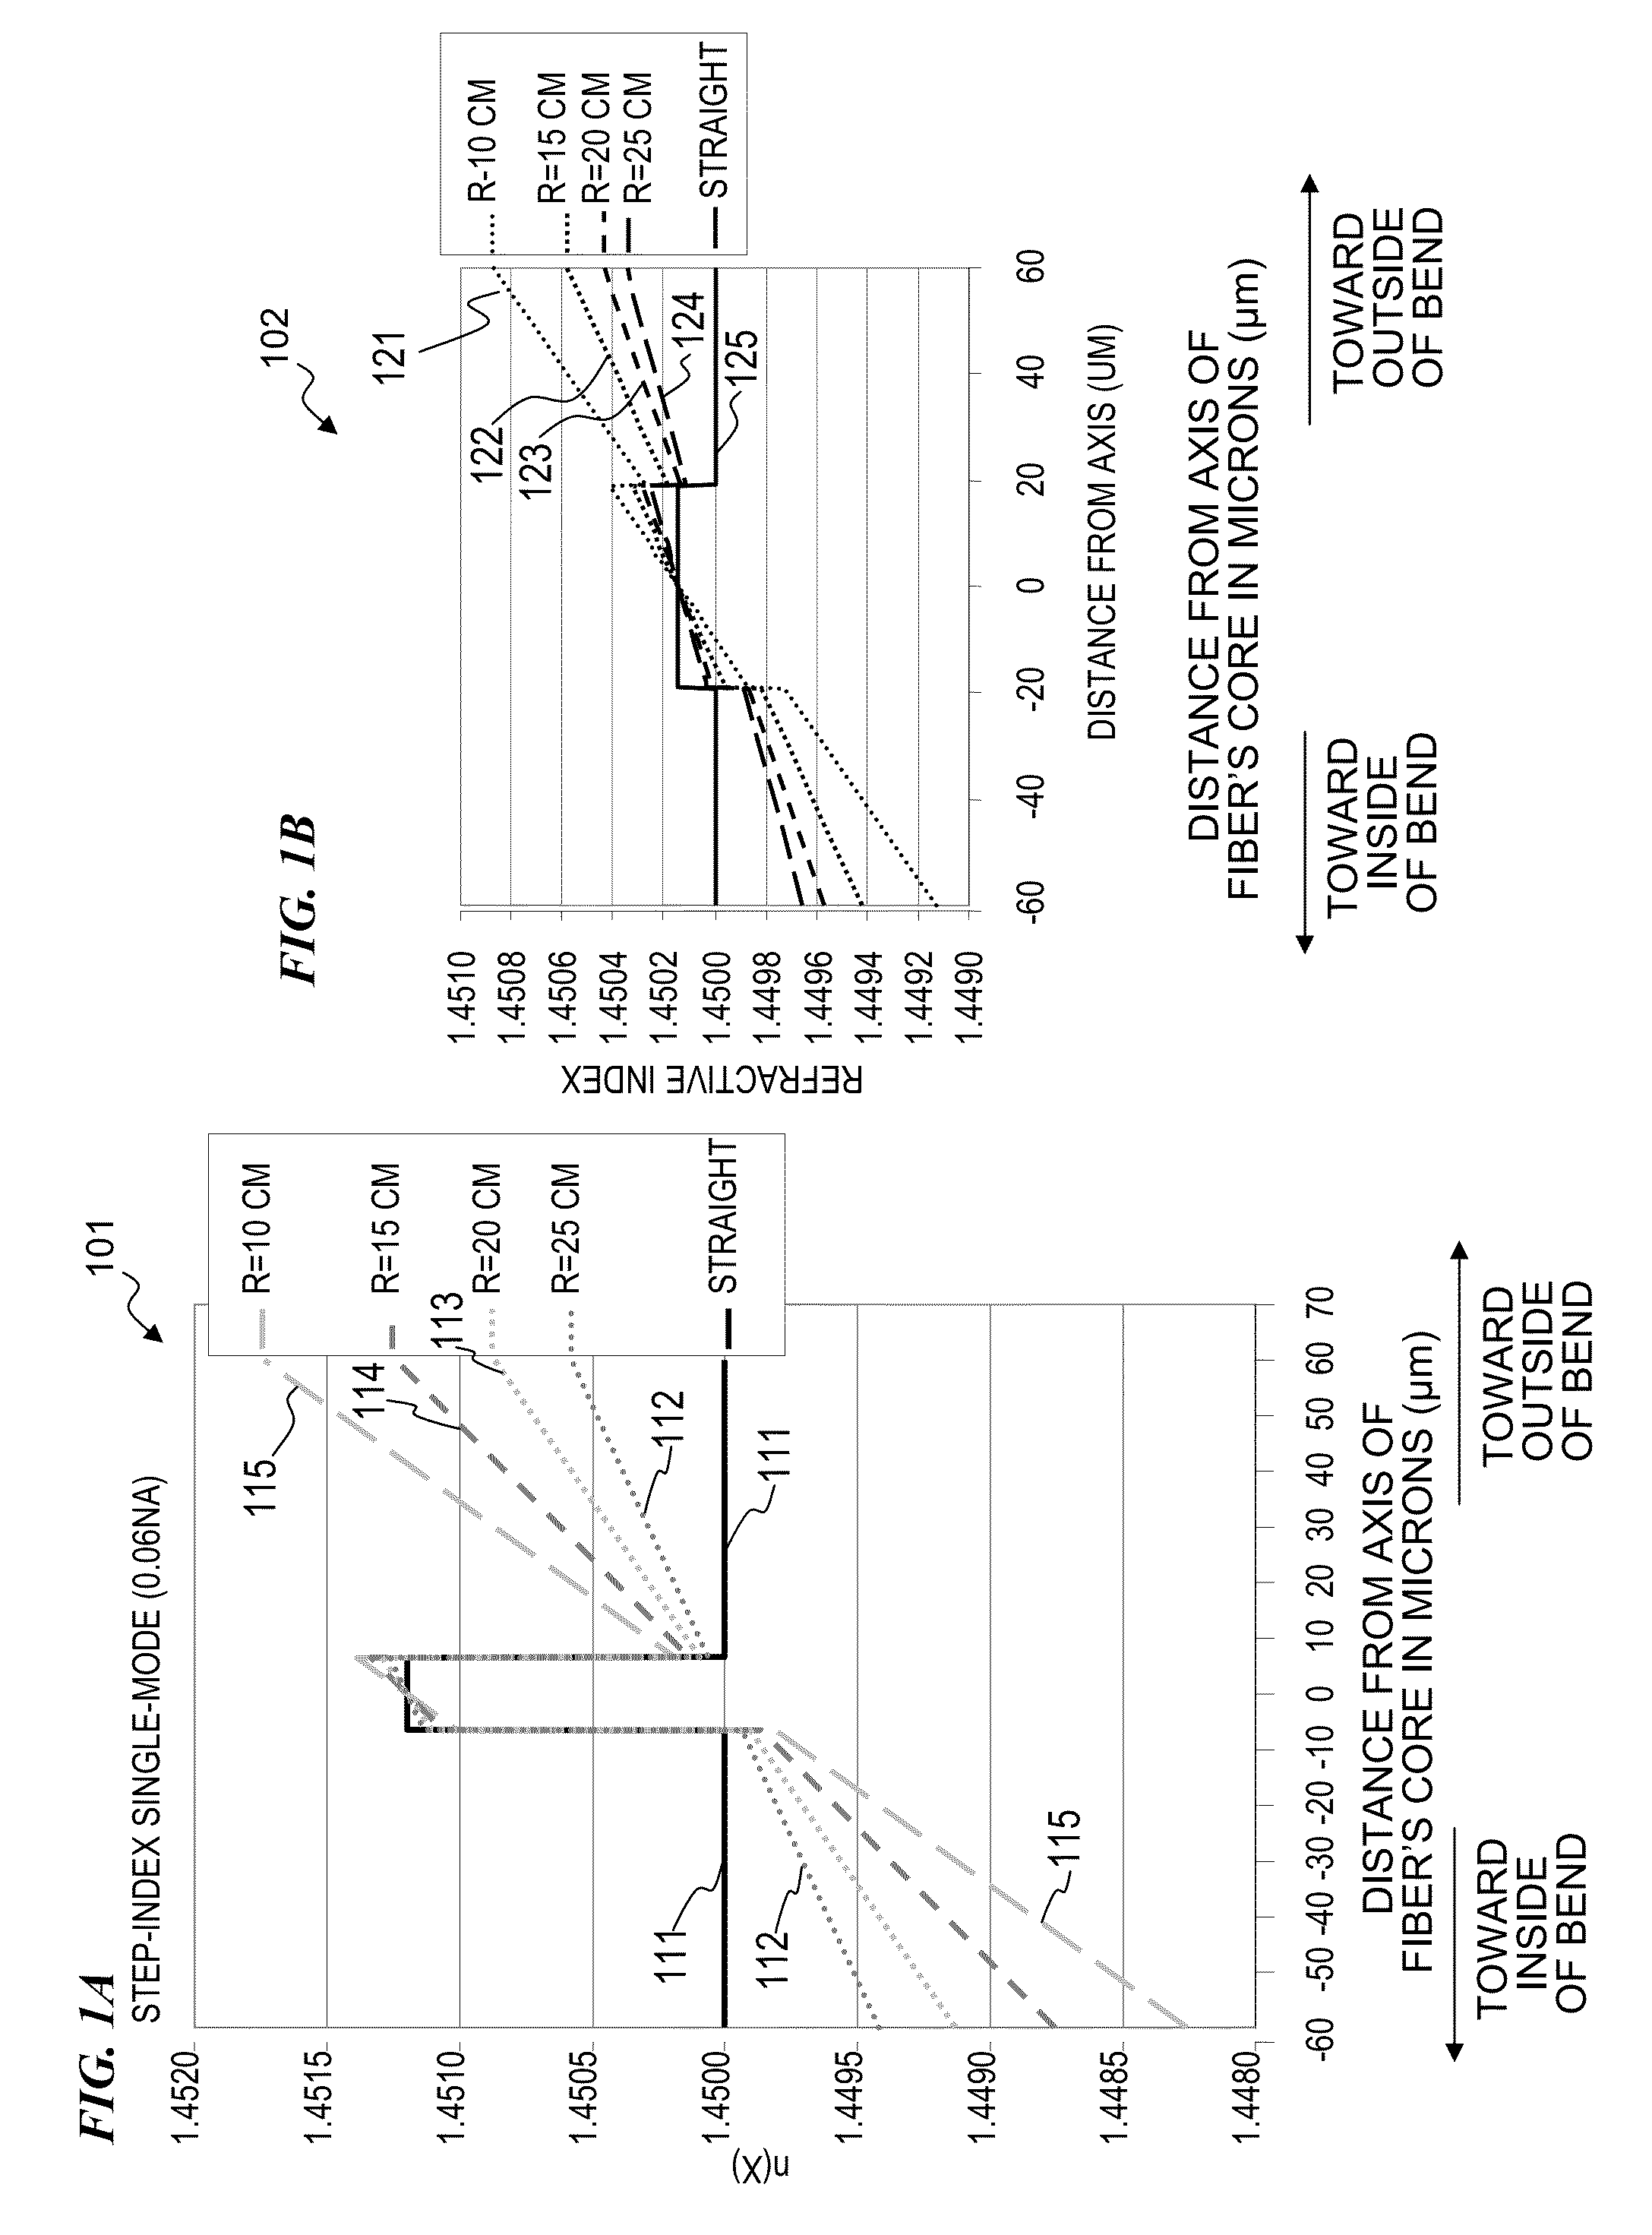 Method and apparatus for compensating for and using mode-profile distortions caused by bending optical fibers